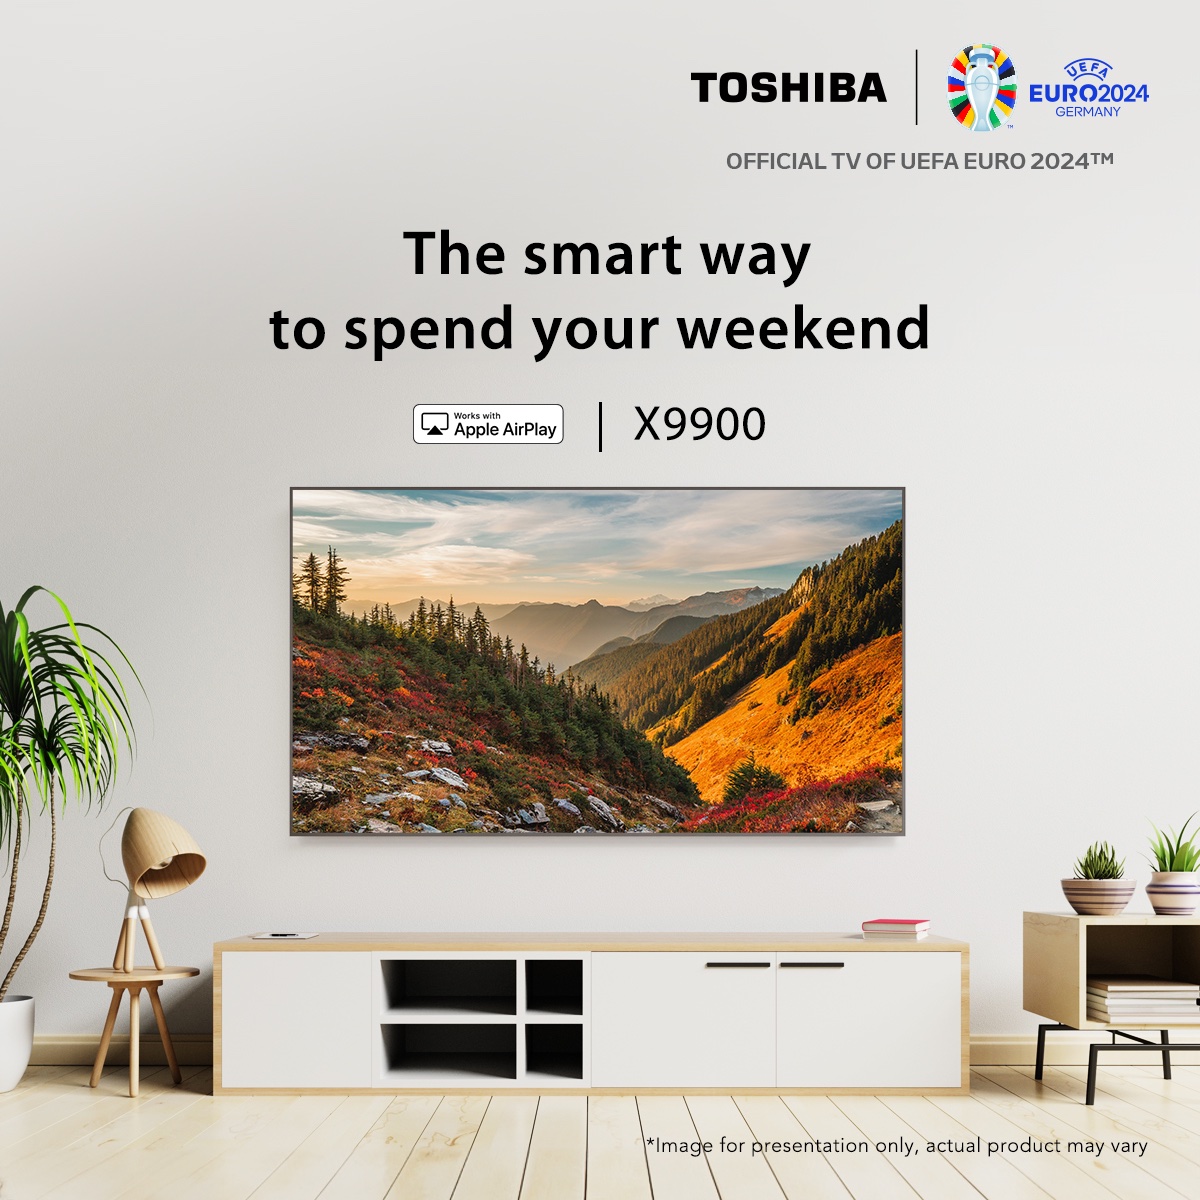 With Apple AirPlay 2 on your #ToshibaTV, stream your favourite movies, music, and games directly from your Apple devices. The weekend indulgence doesn't stop there–dim the lights and transform your living room with Apple HomeKit. Toshiba makes lazy feel luxurious.